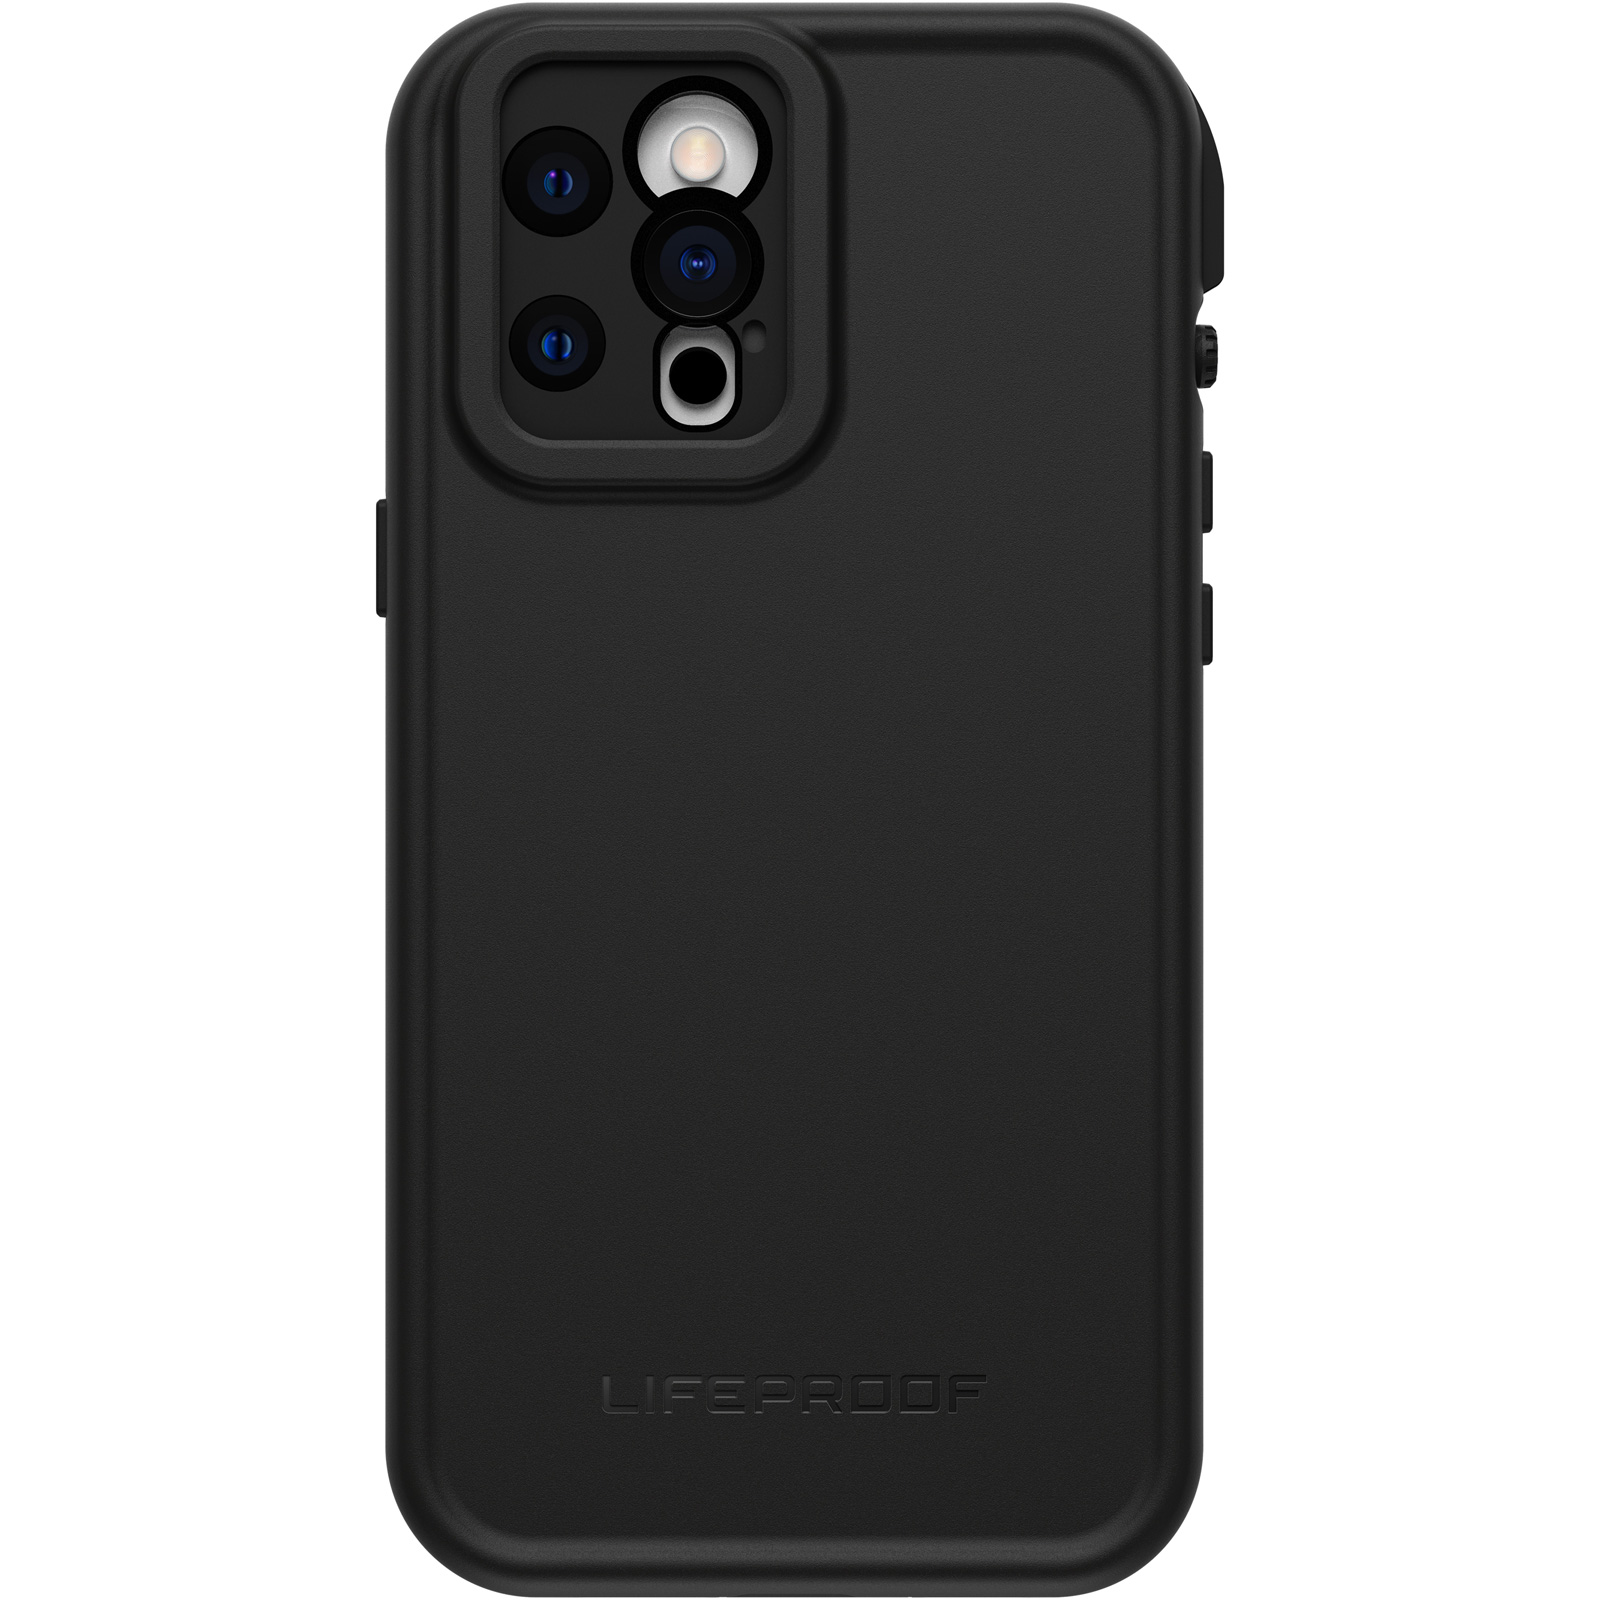 Take FRĒ, the WaterProof case for iPhone 12 Pro Max, on every 